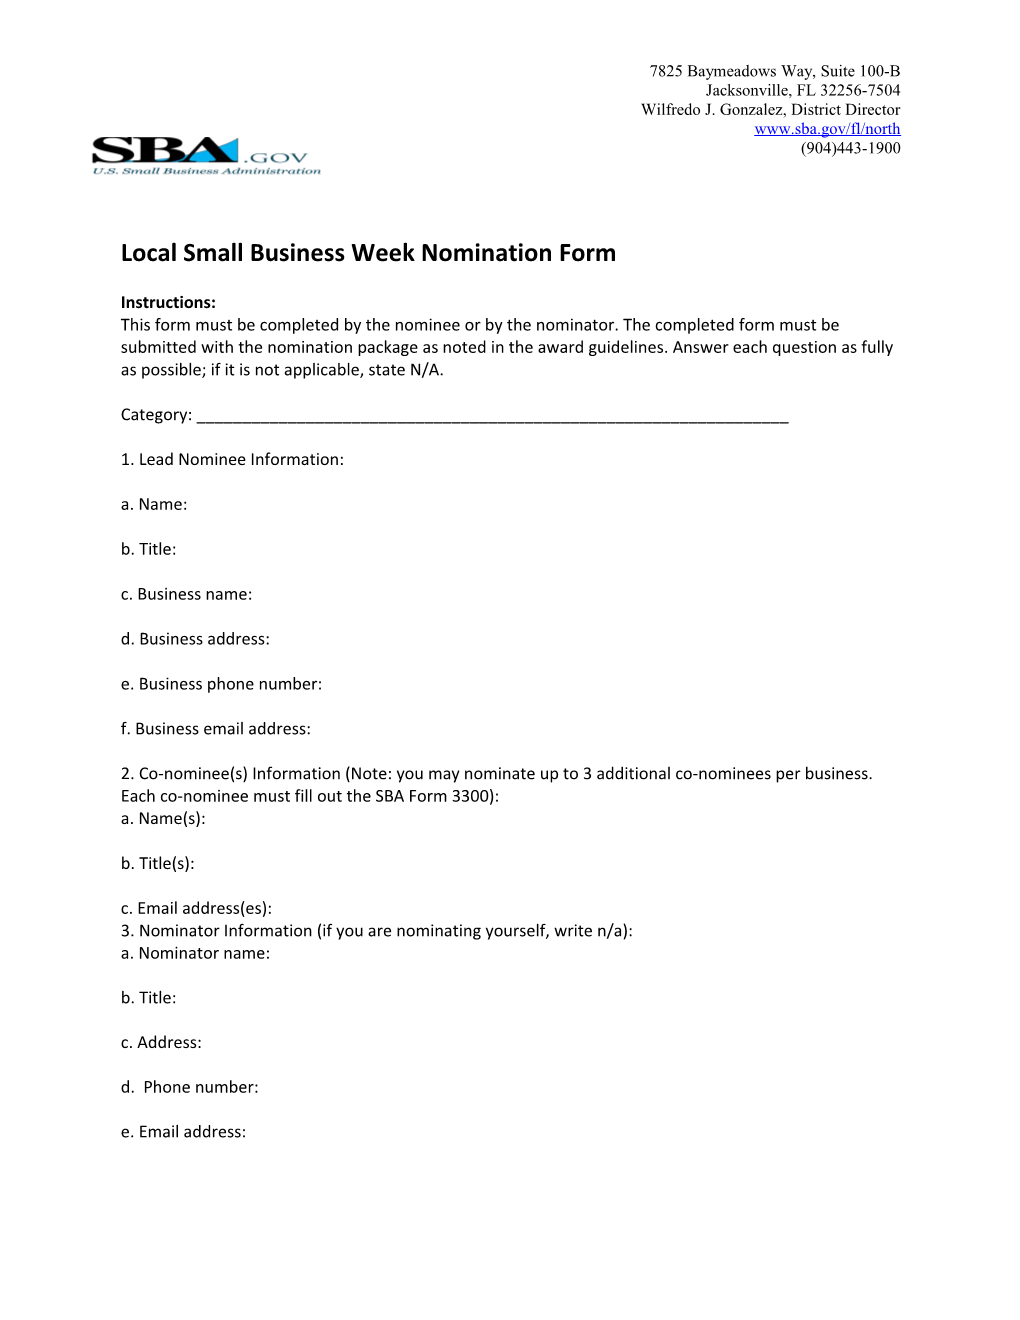 Local Small Business Week Nomination Form